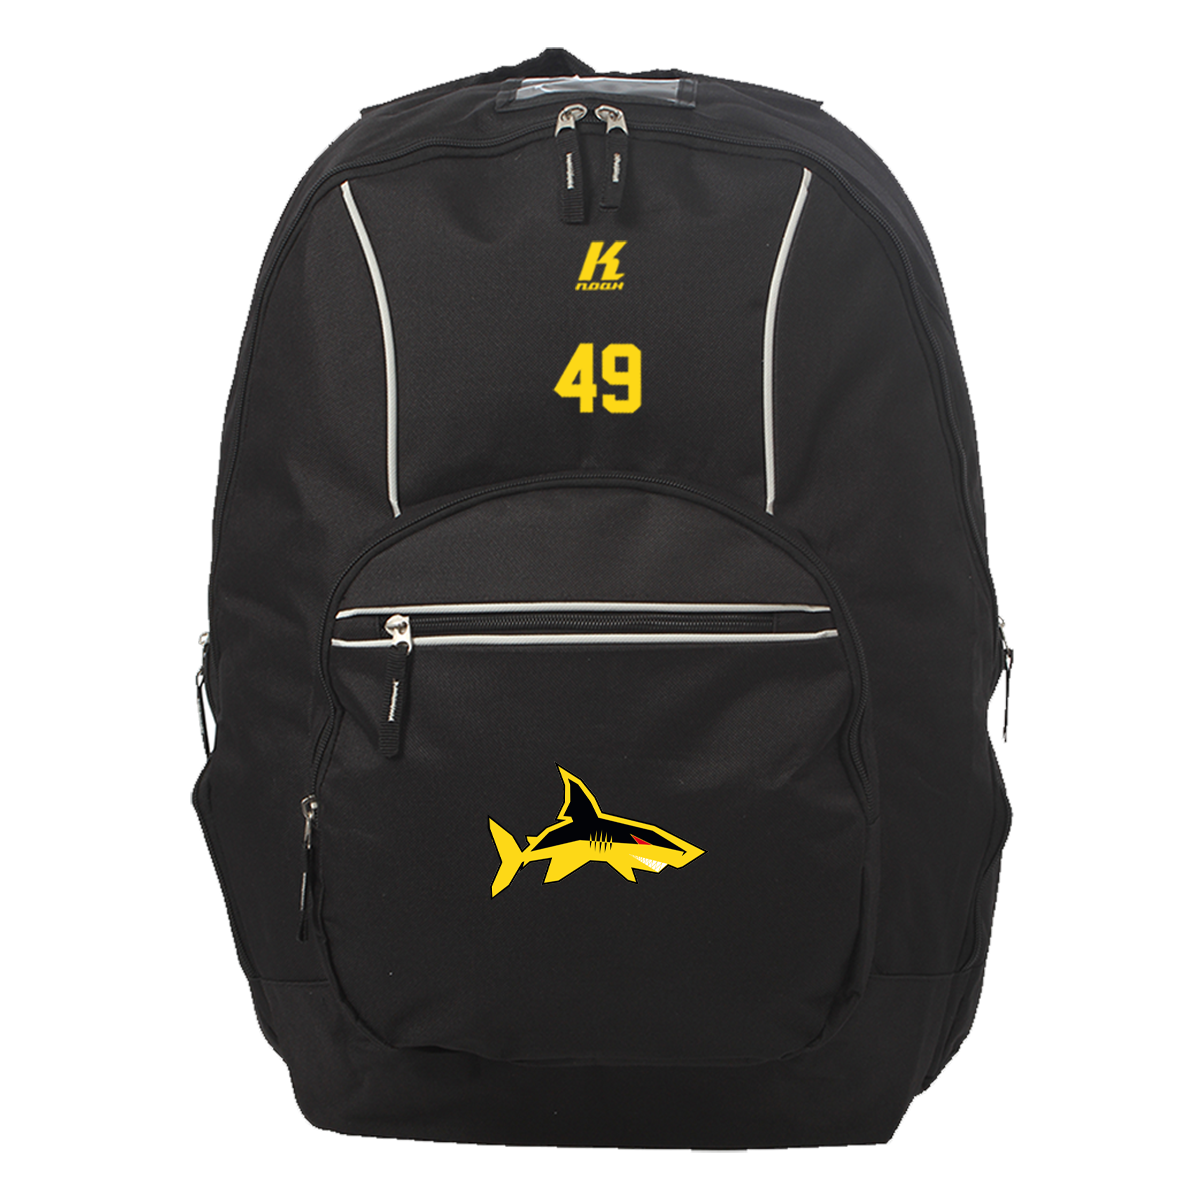 Sharks Heritage Backpack with Playernumber or Initials